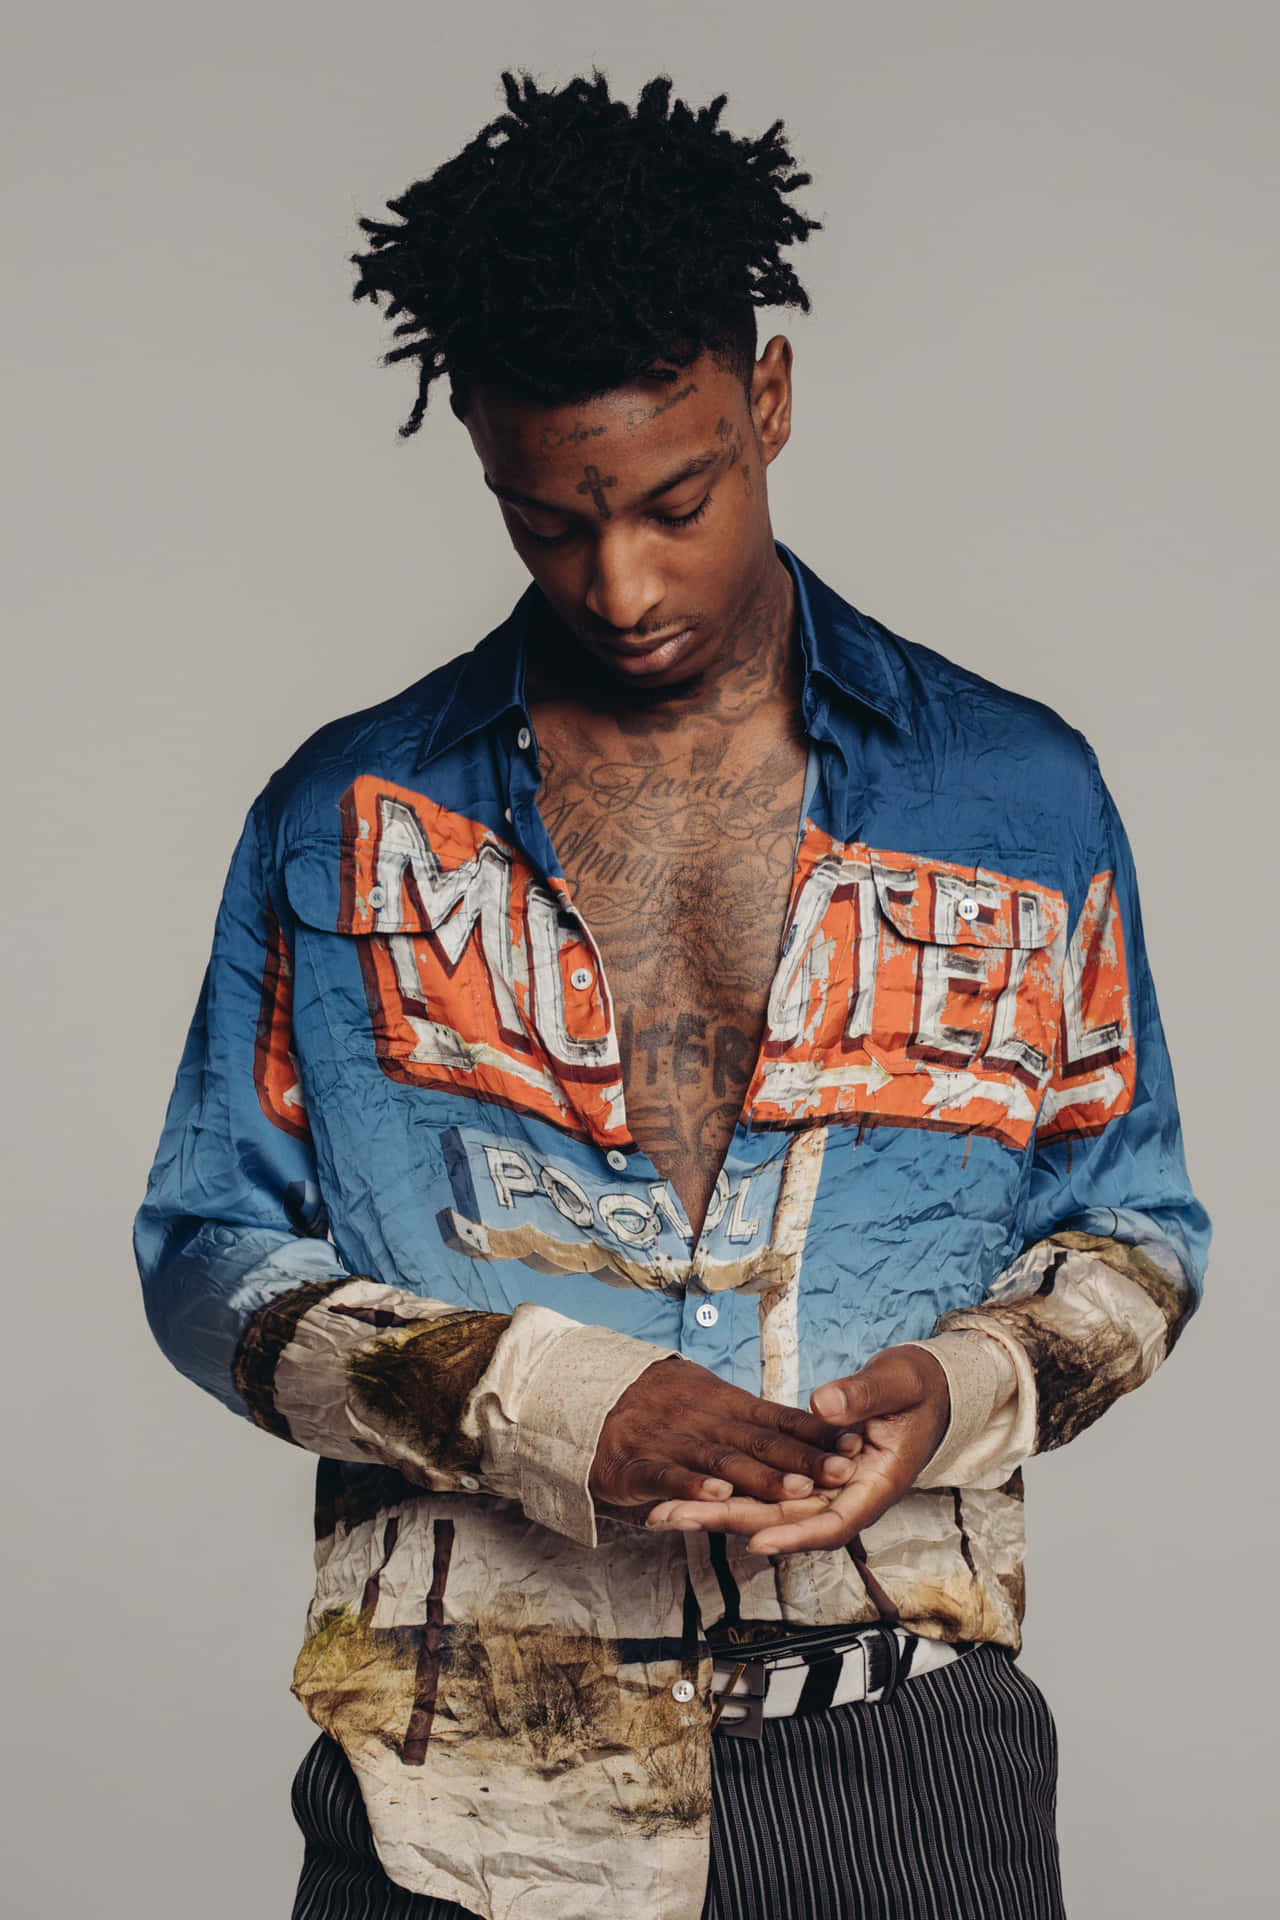 21 Savage poses in front of his signature XO brand logo.